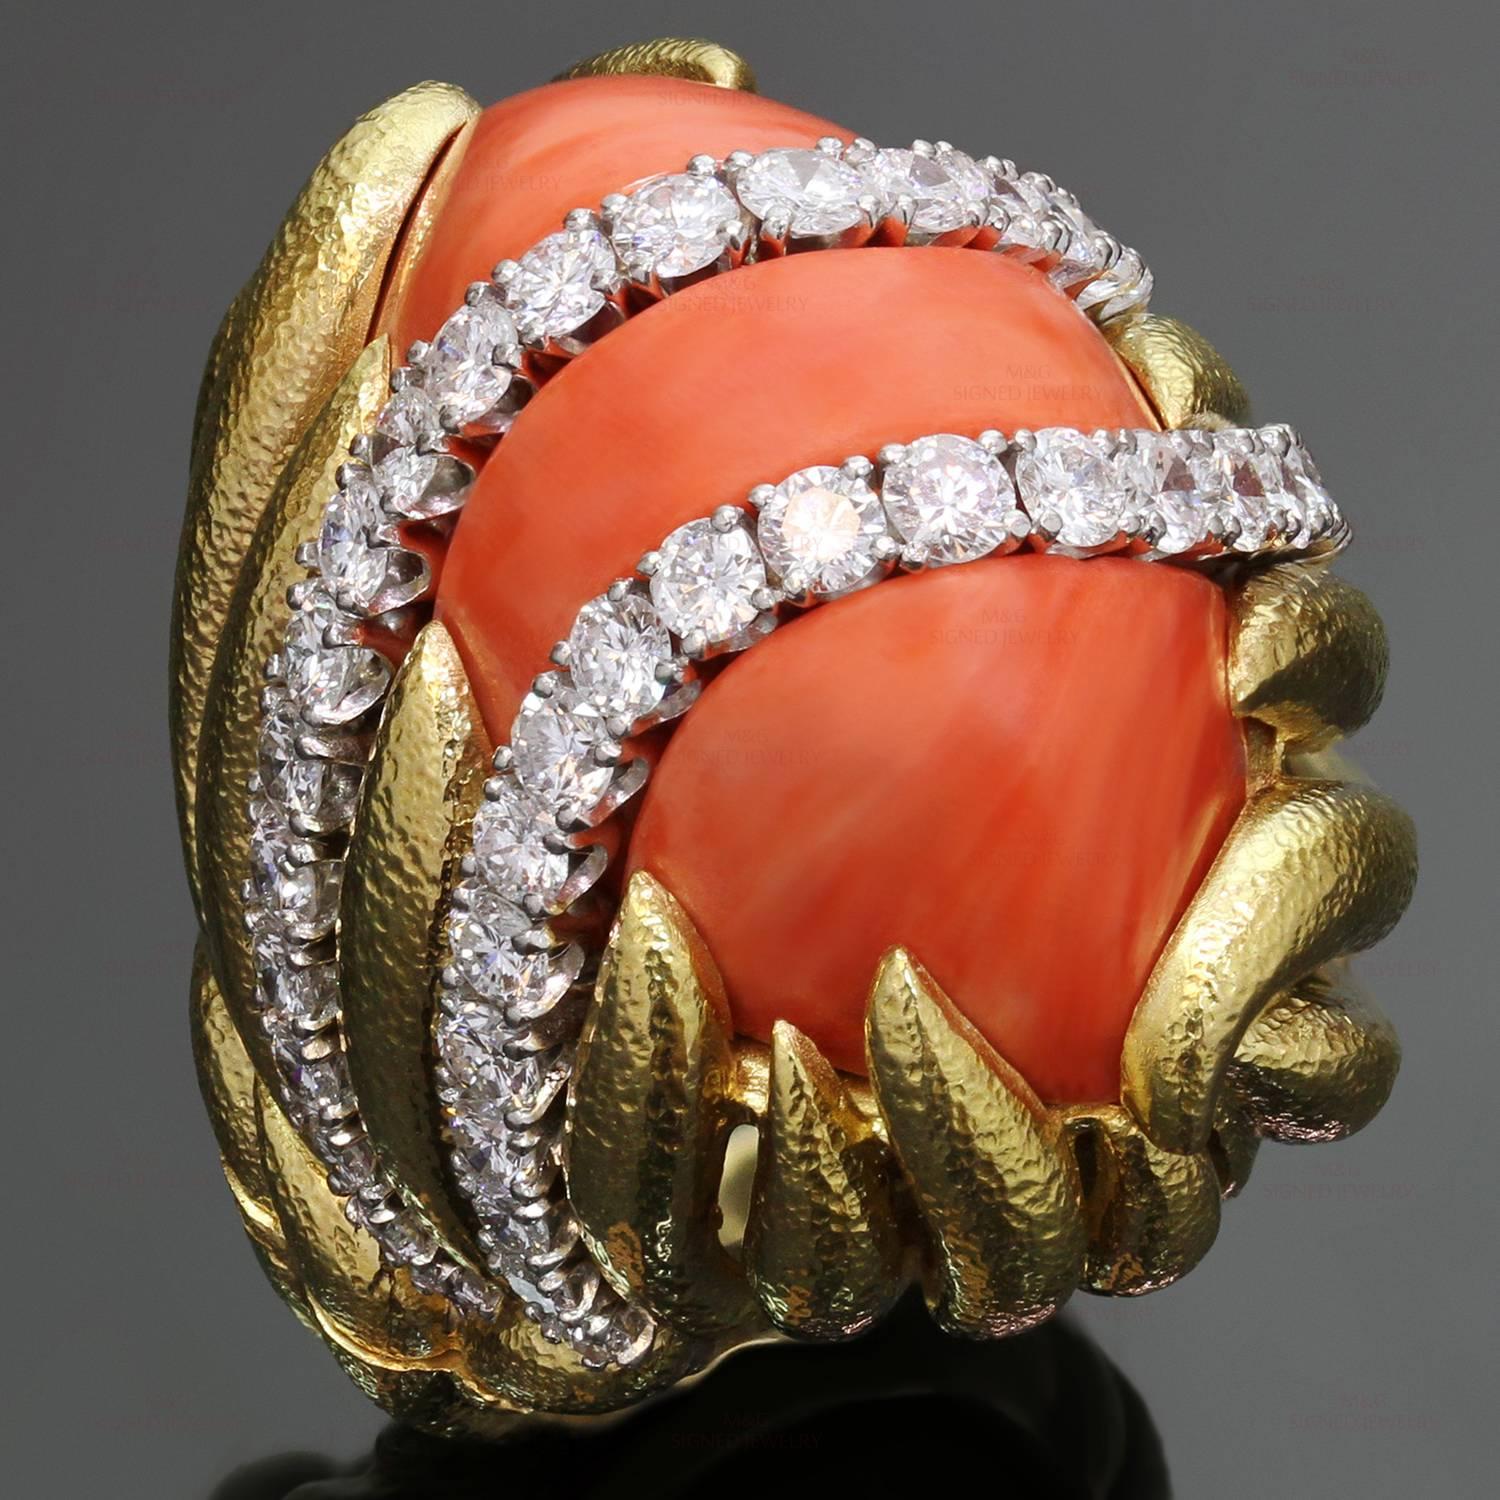 This gorgeous vintage David Webb cocktail ring is crafted in 18k yellow gold with platinum accents and set with a natural oval coral and brilliant-cut round diamonds of an estimated 1.0 carats. The ring size is adjustable with inner ring guard.